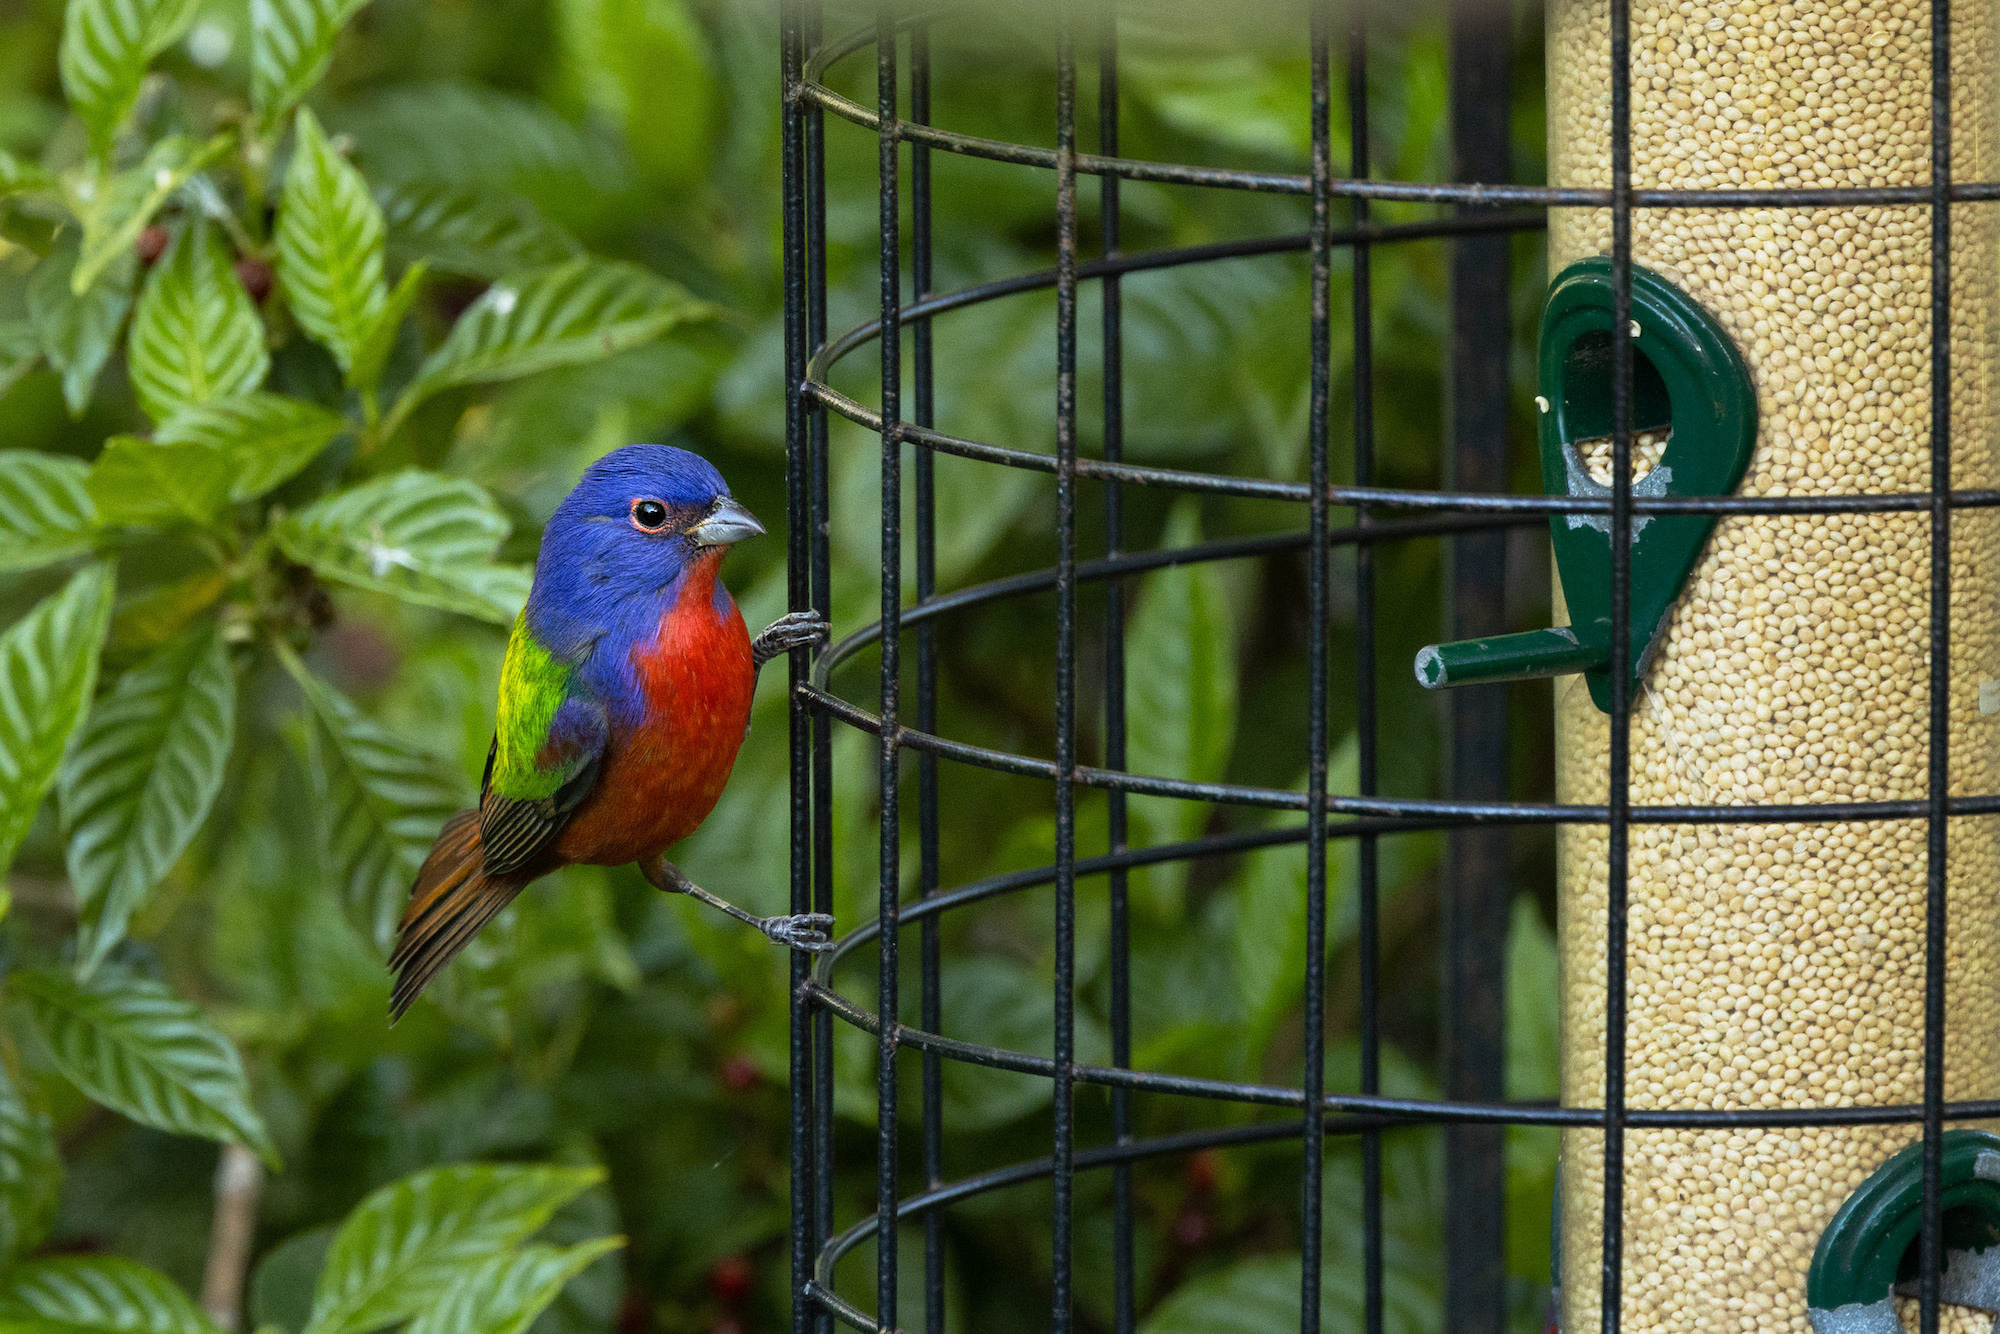 Photograph of a blue and red bird perched on the outside of its cage.